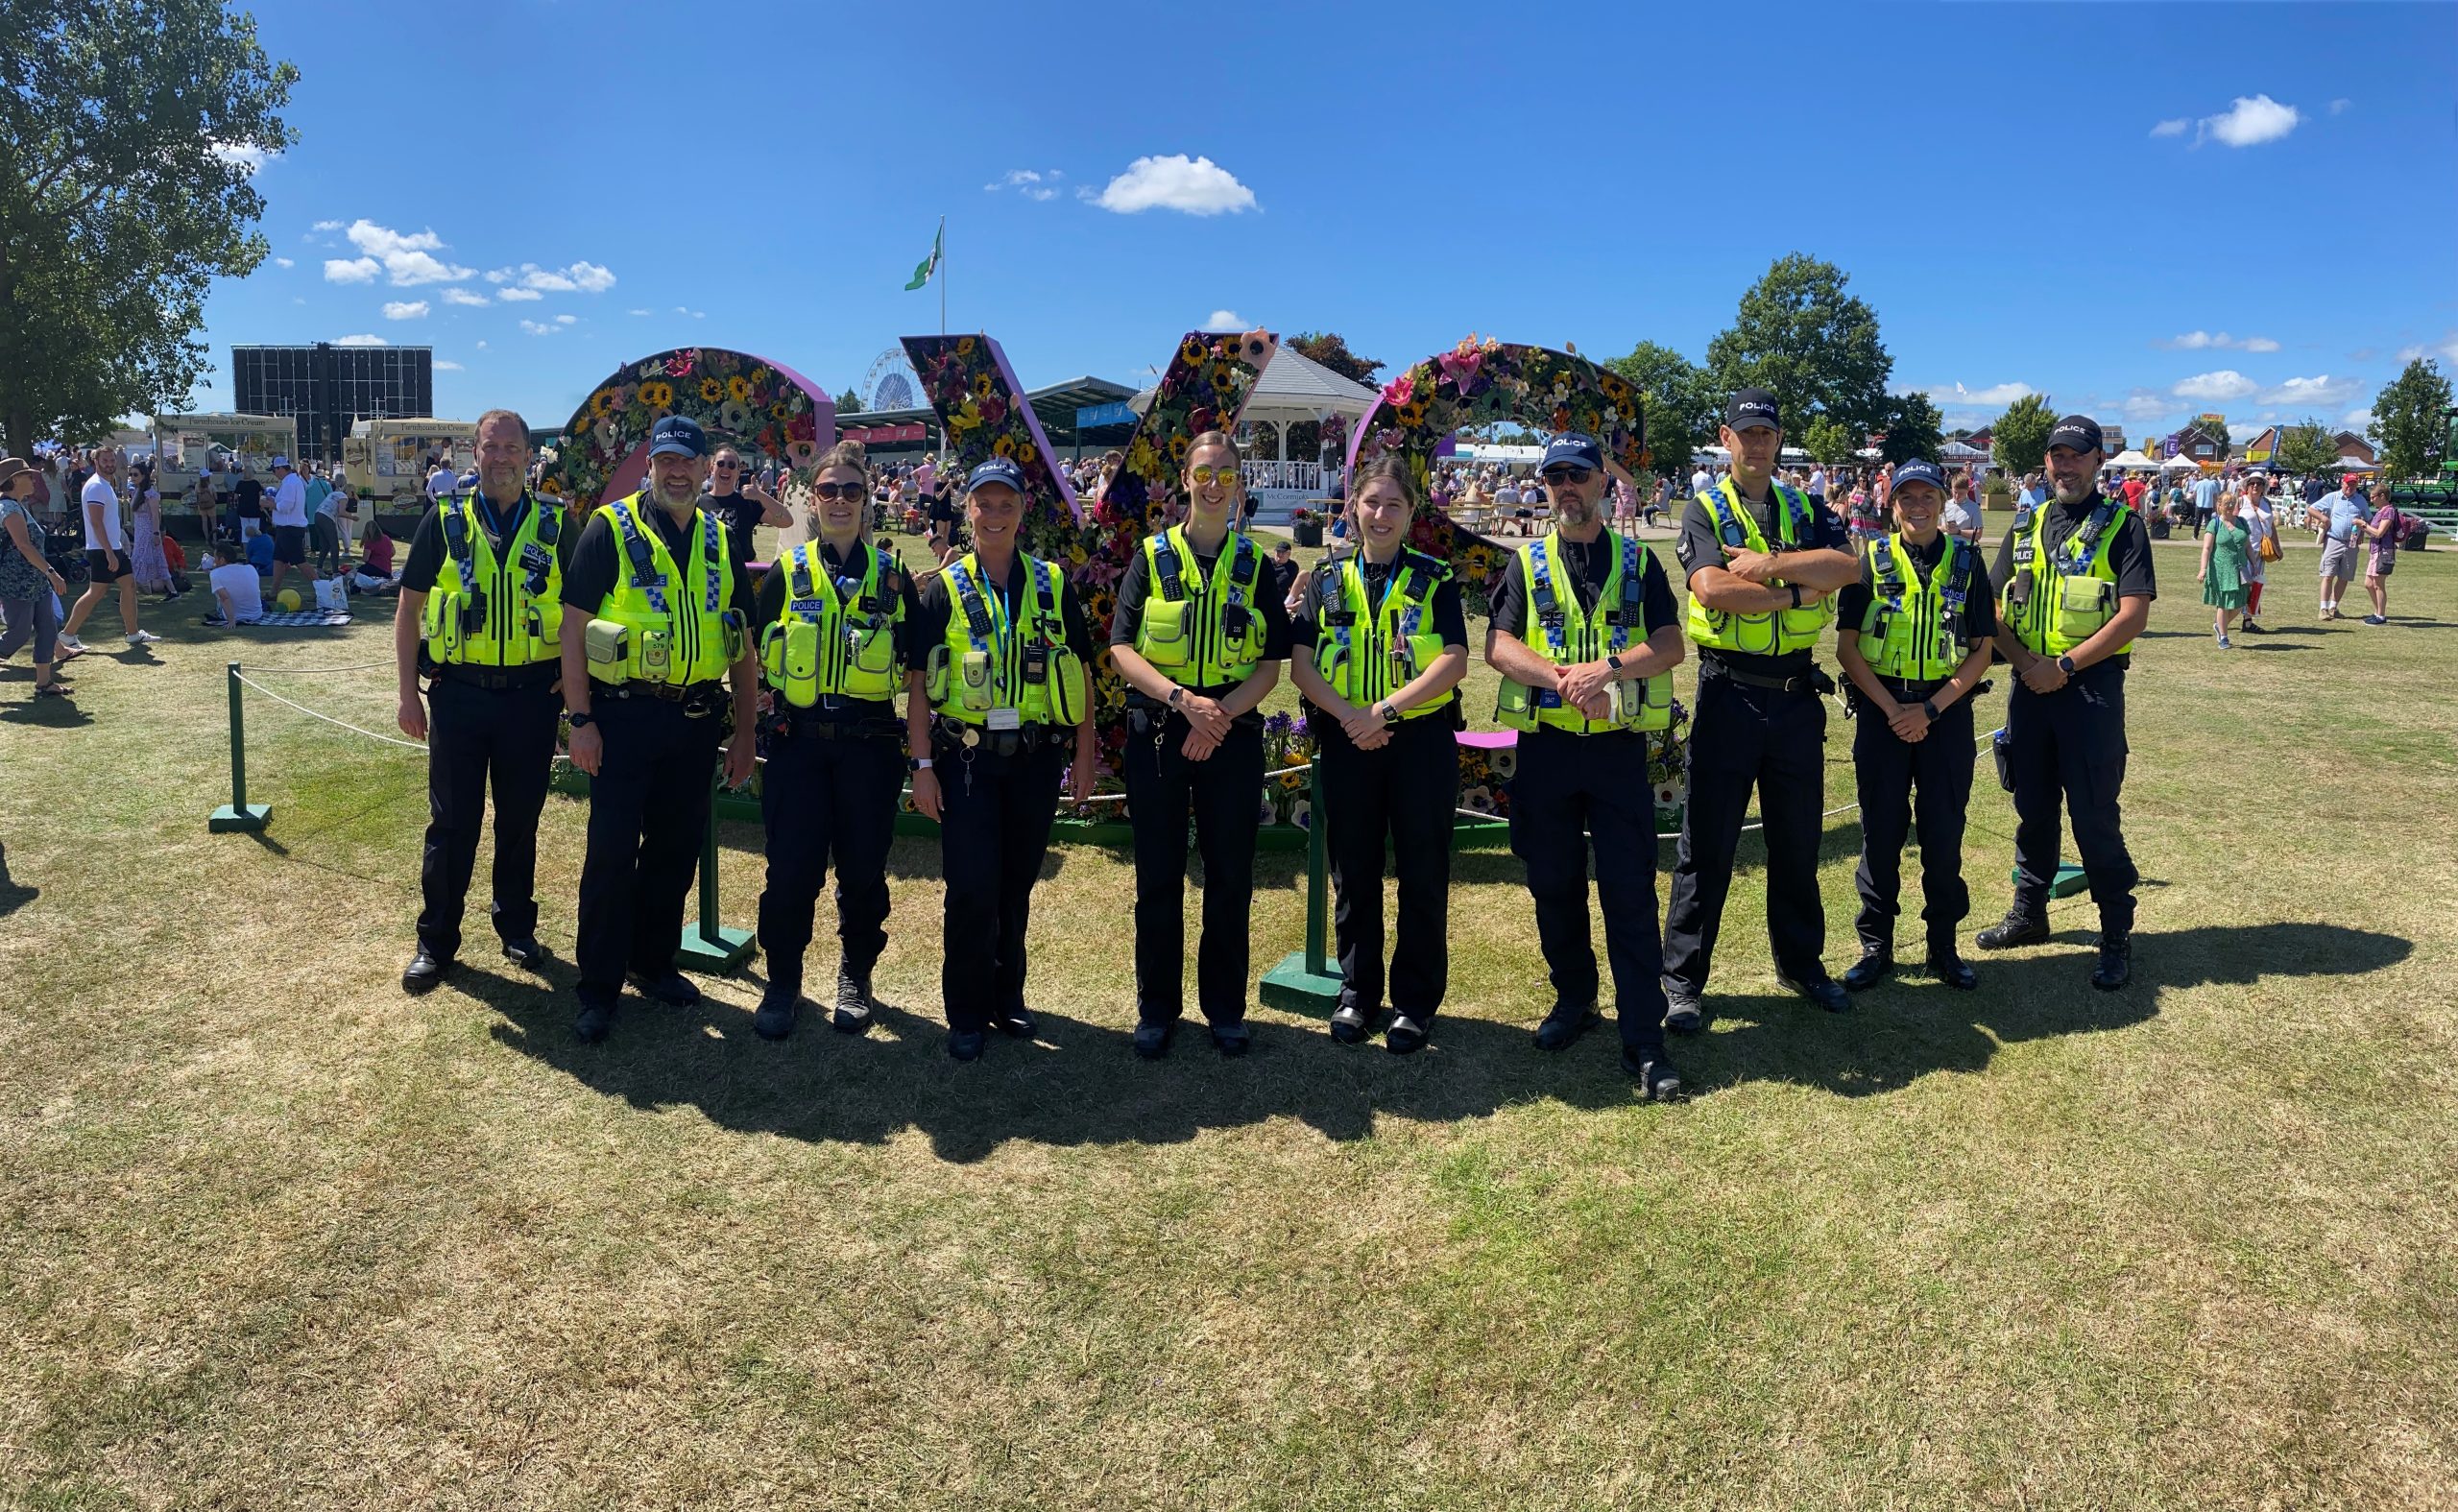 Police at Great Yorkshire Show 2022